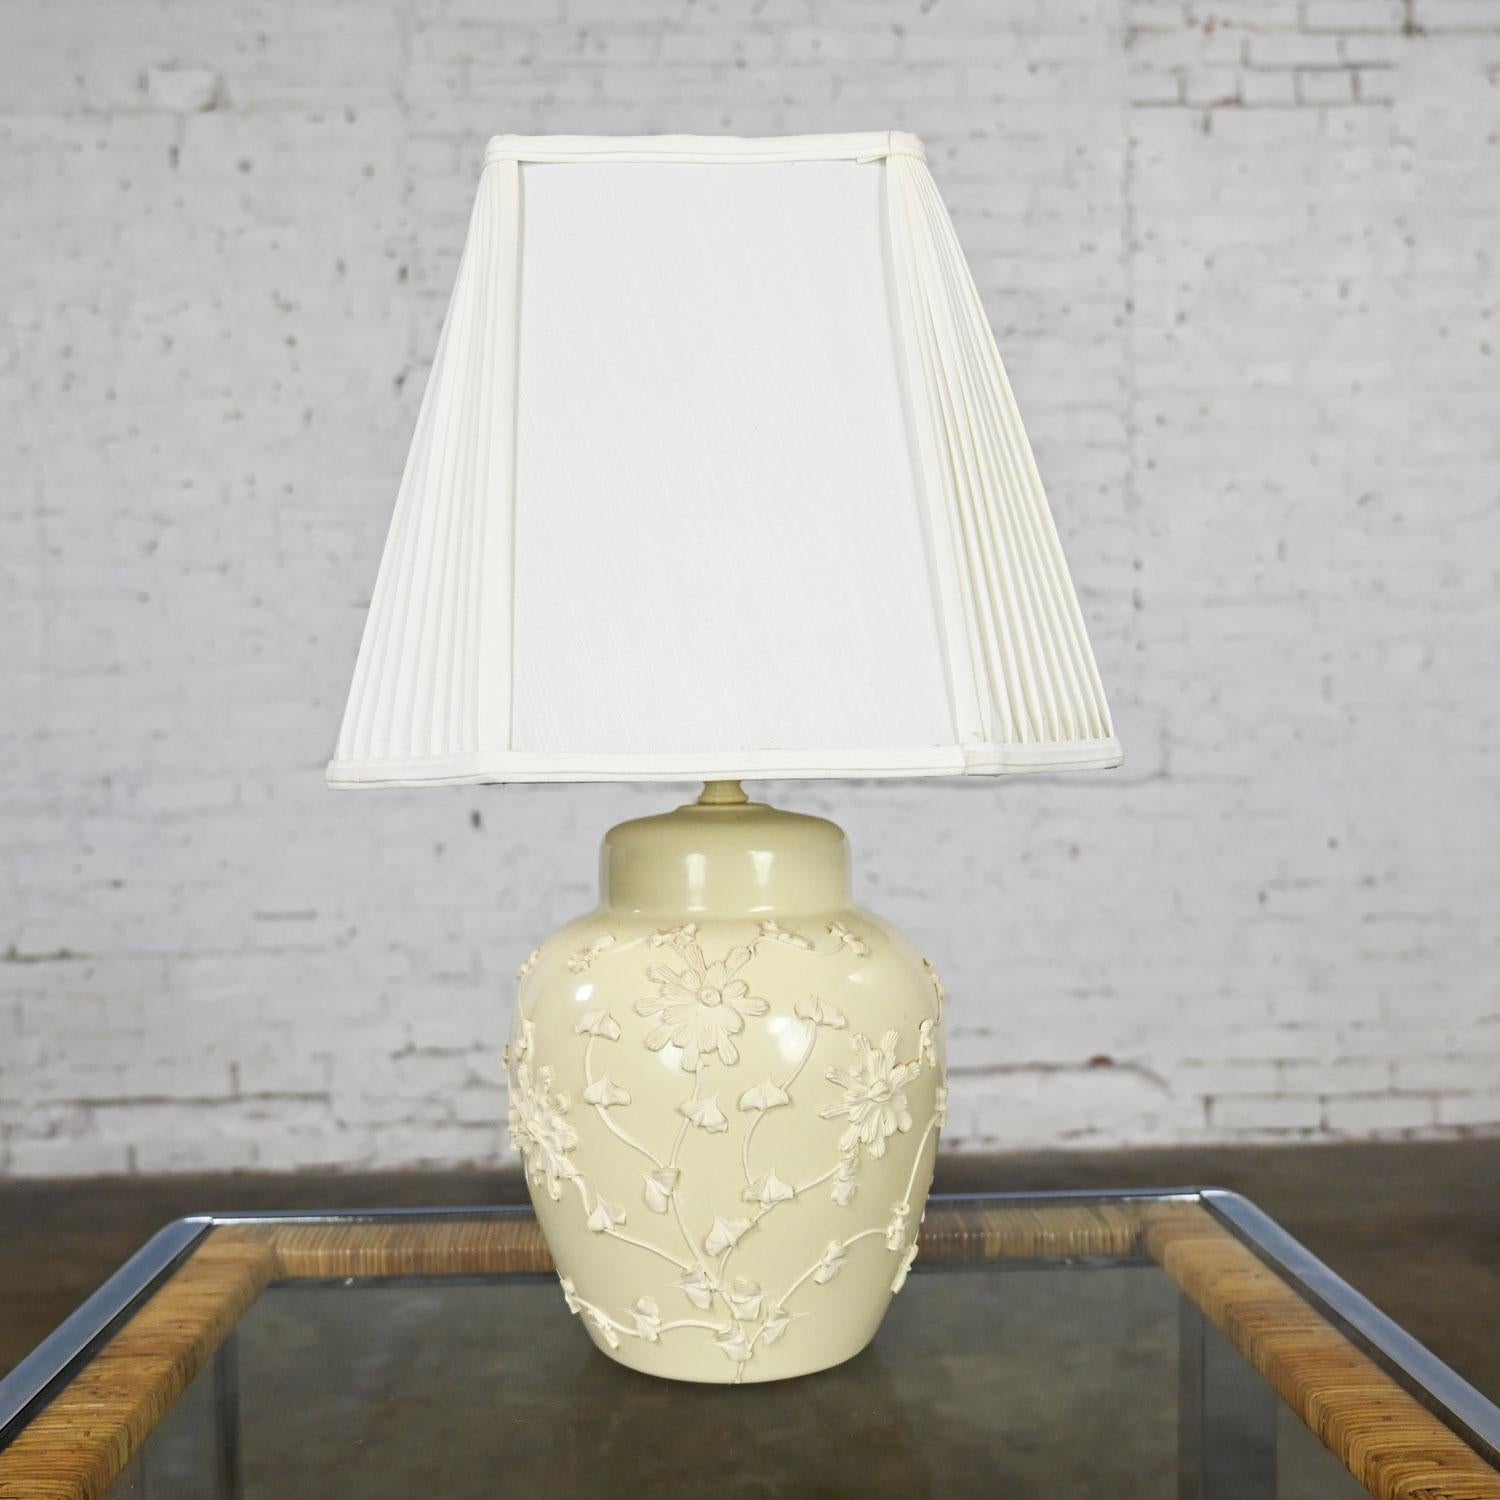 Chinoiserie Latte Clr Ginger Jar Lamp Frosting Design Pleated White Fabric Shade In Good Condition For Sale In Topeka, KS